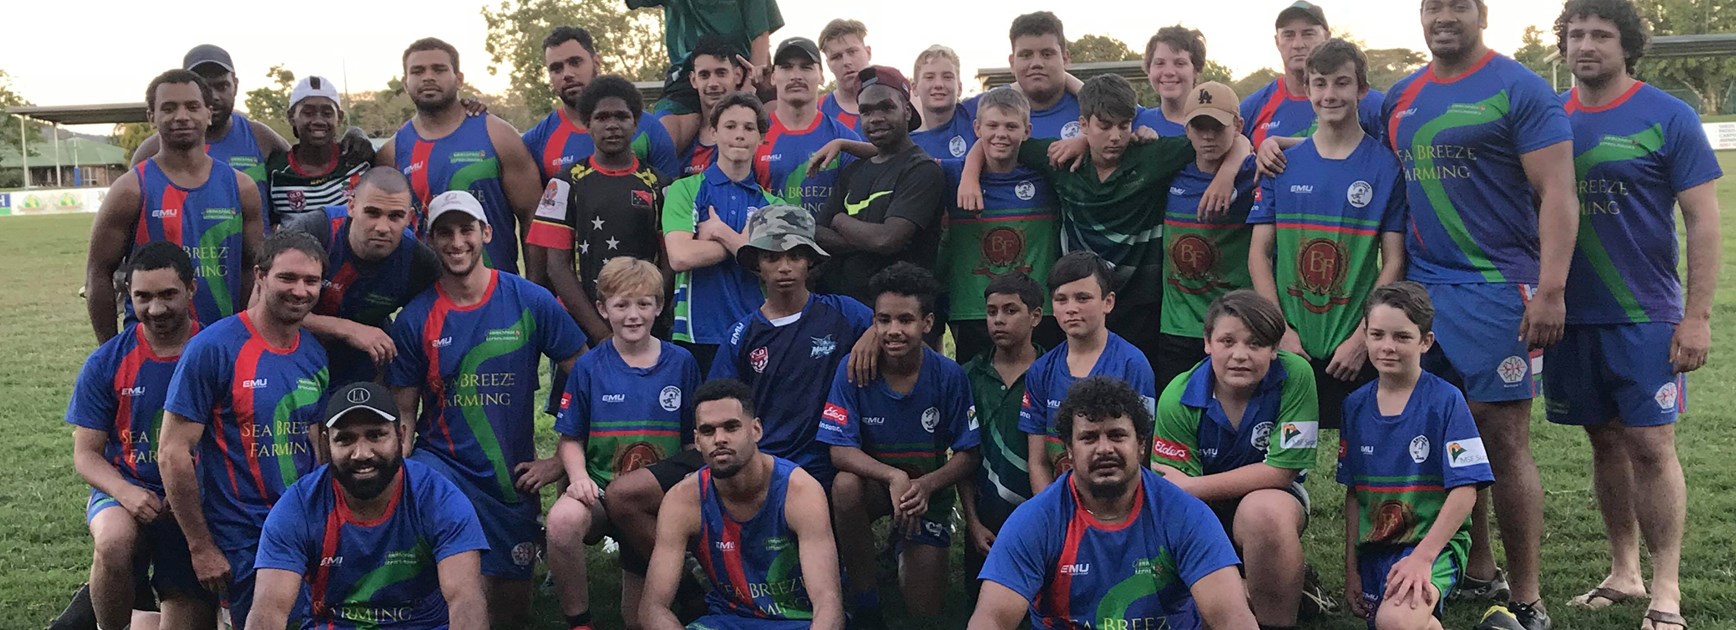 Innisfail A graders pass on wisdom to Under 13 team